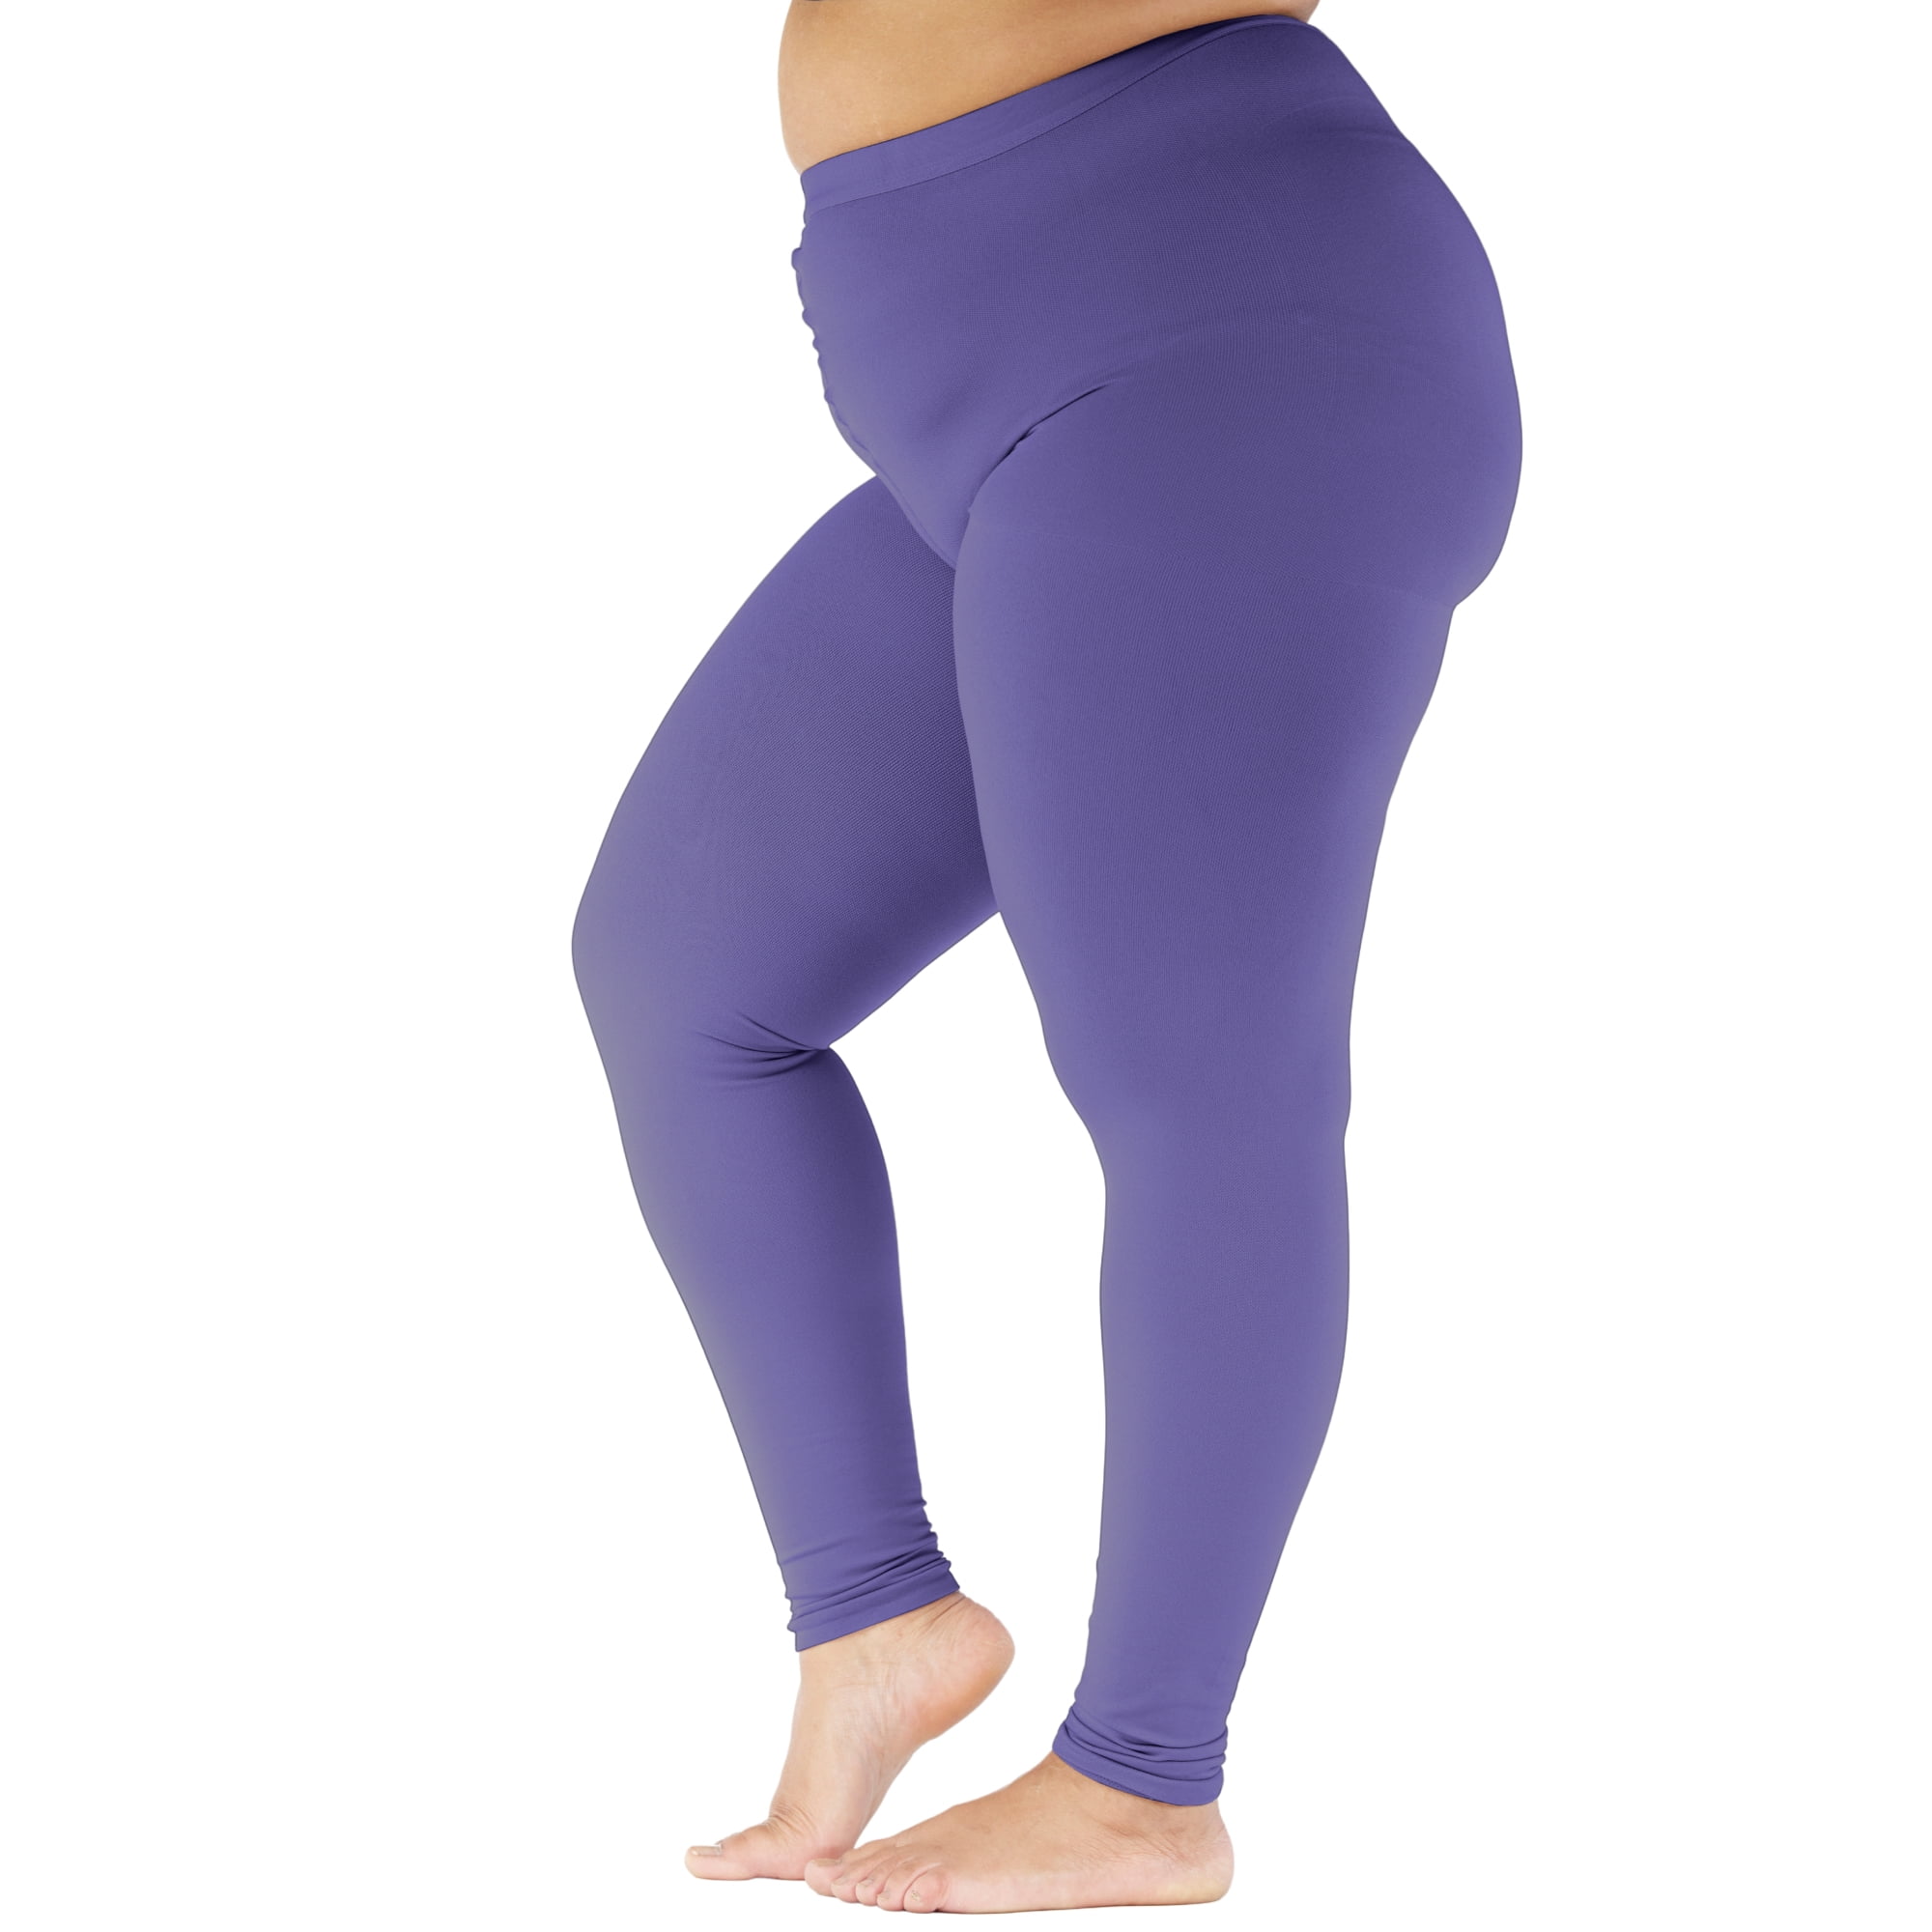 Extra Large Compression Leggings for Women 20-30mmHg Swelling - Purple,  5X-Large 